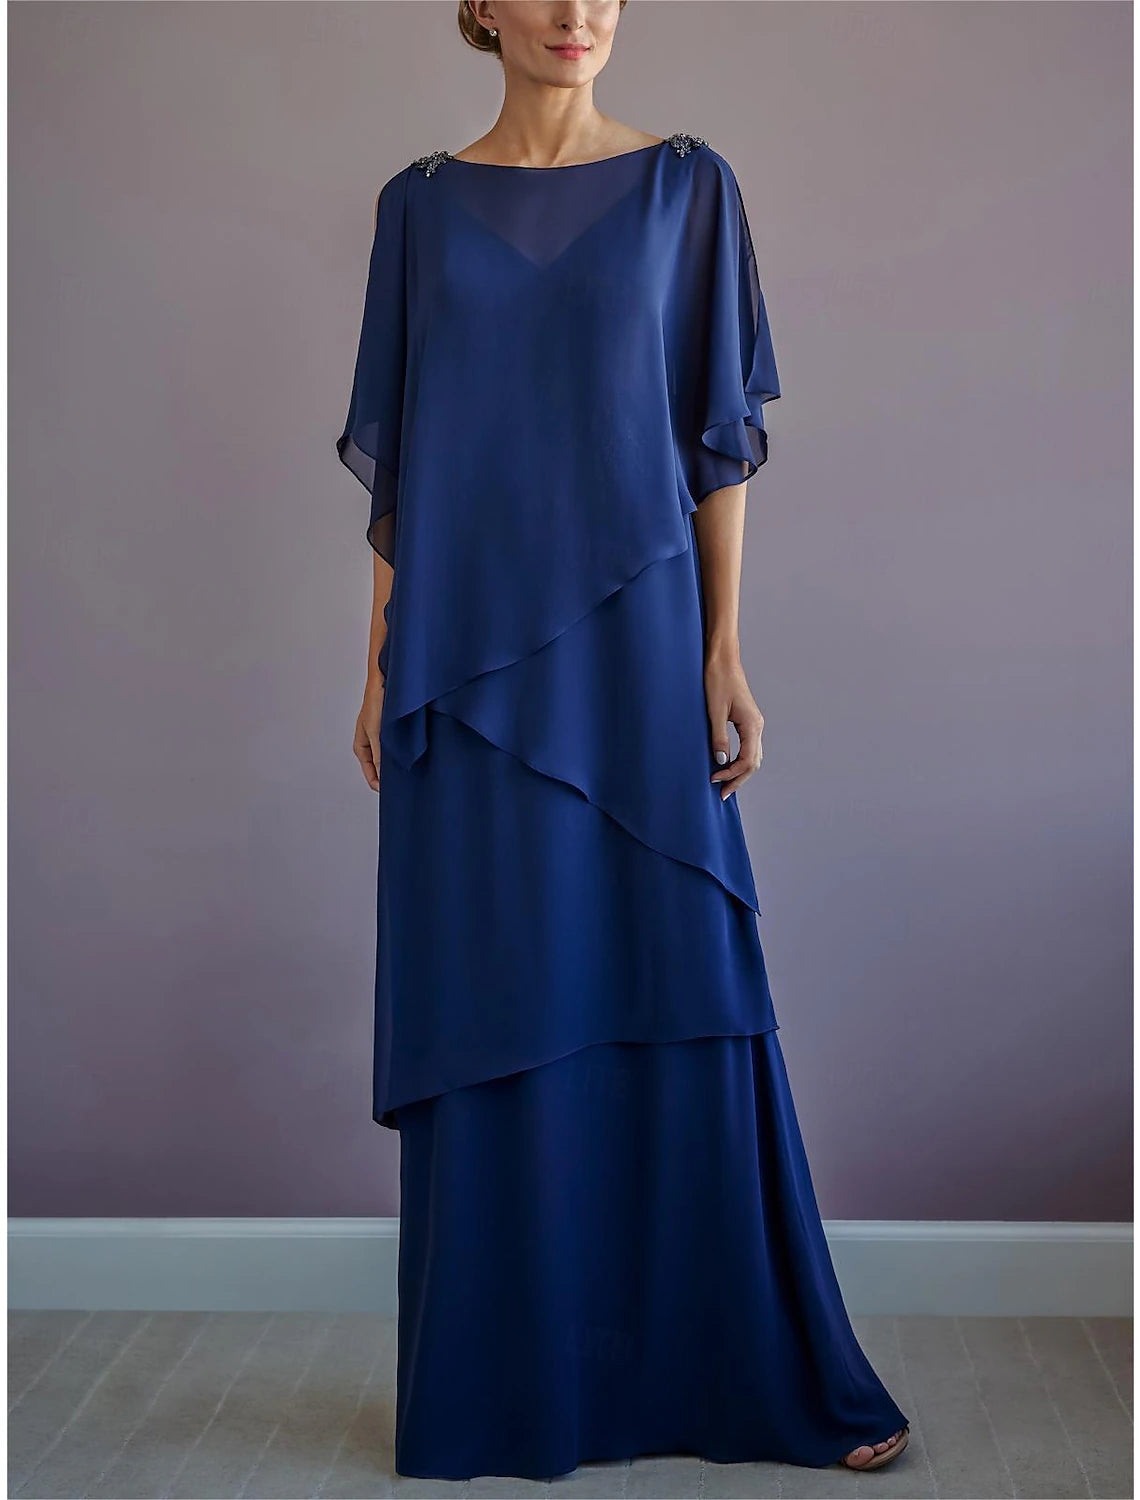 A-Line Mother of the Bride Dress Formal Wedding Guest Elegant Bateau Neck Floor Length Chiffon Half Sleeve with Ruffles Draping Tier